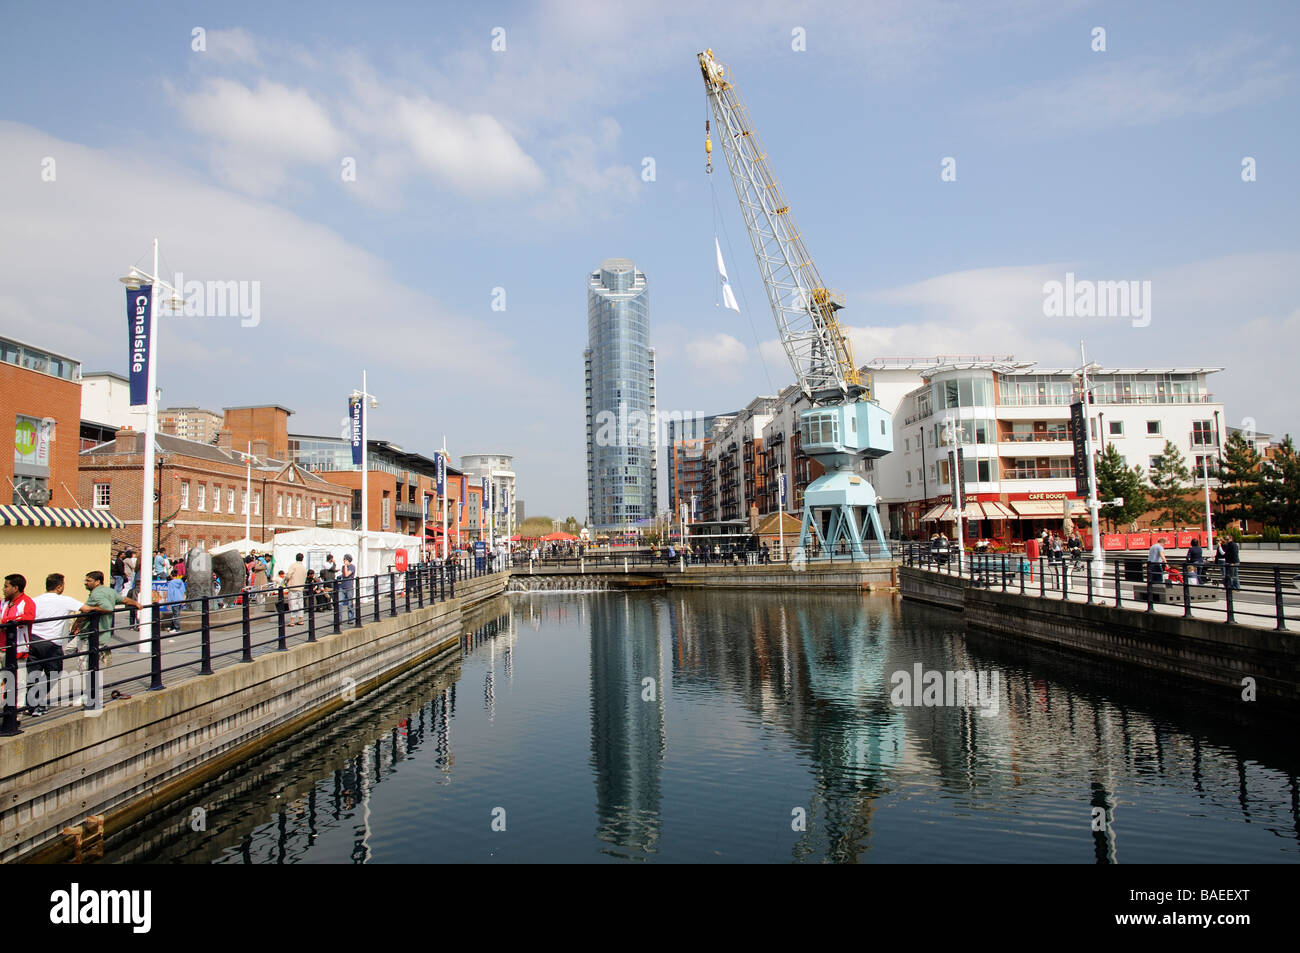 Gunwharf Quays property development of housing and shopping in Portsmouth England UK Stock Photo